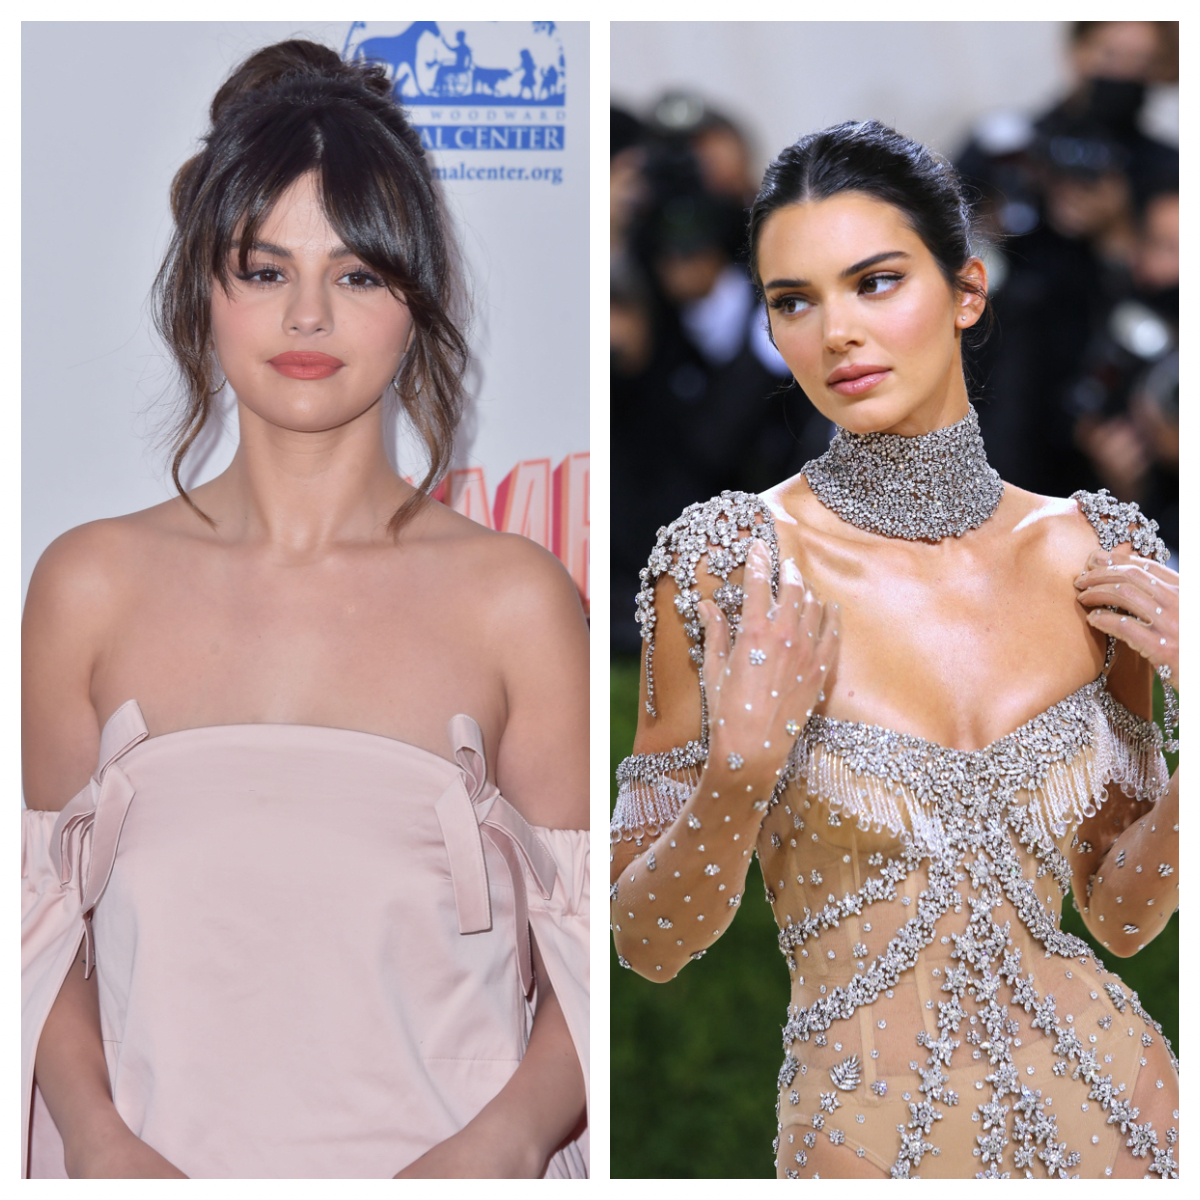 She learned from the best! Șapte momente în care Selena Gomez a copiat-o pe Kendall Jenner